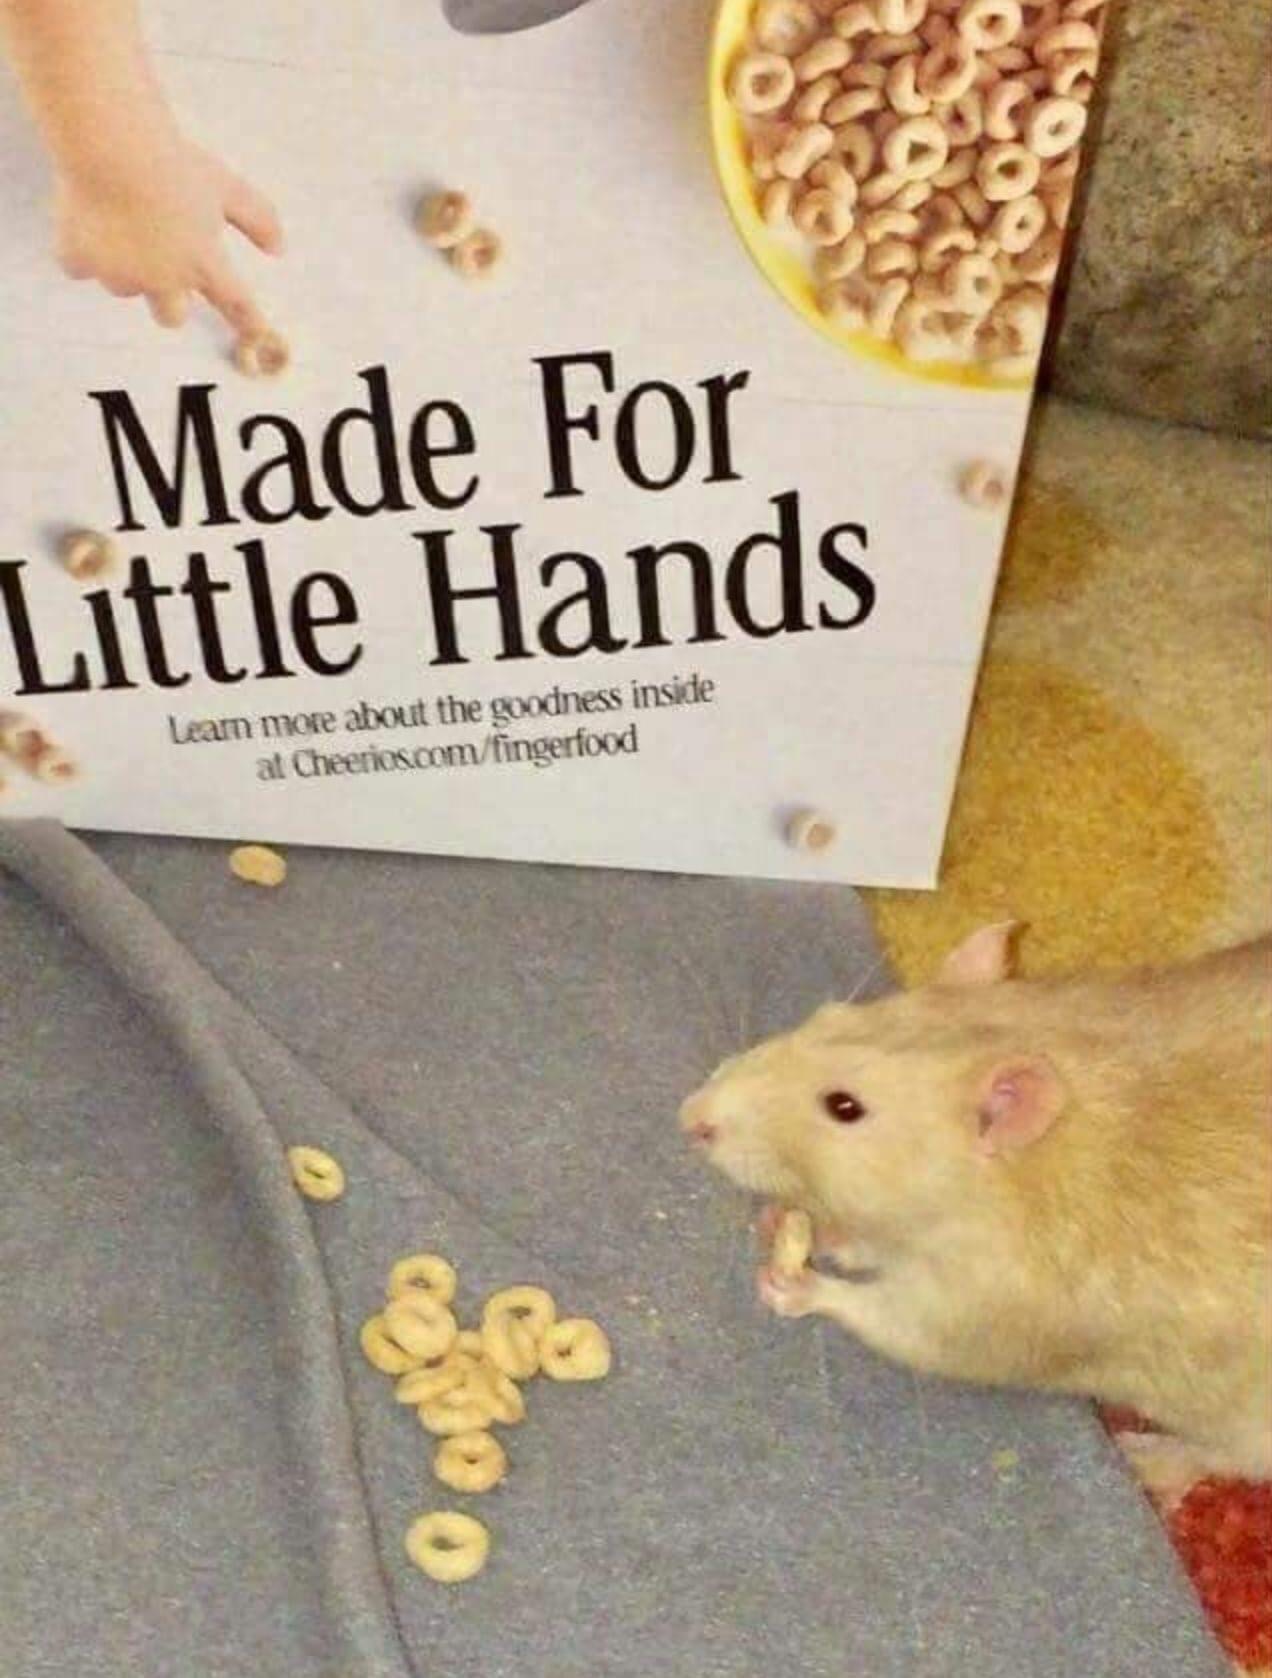 made for little hands rat - Made For Little Hands Leam more about the goodness inside at Cheerios.comfingerfood